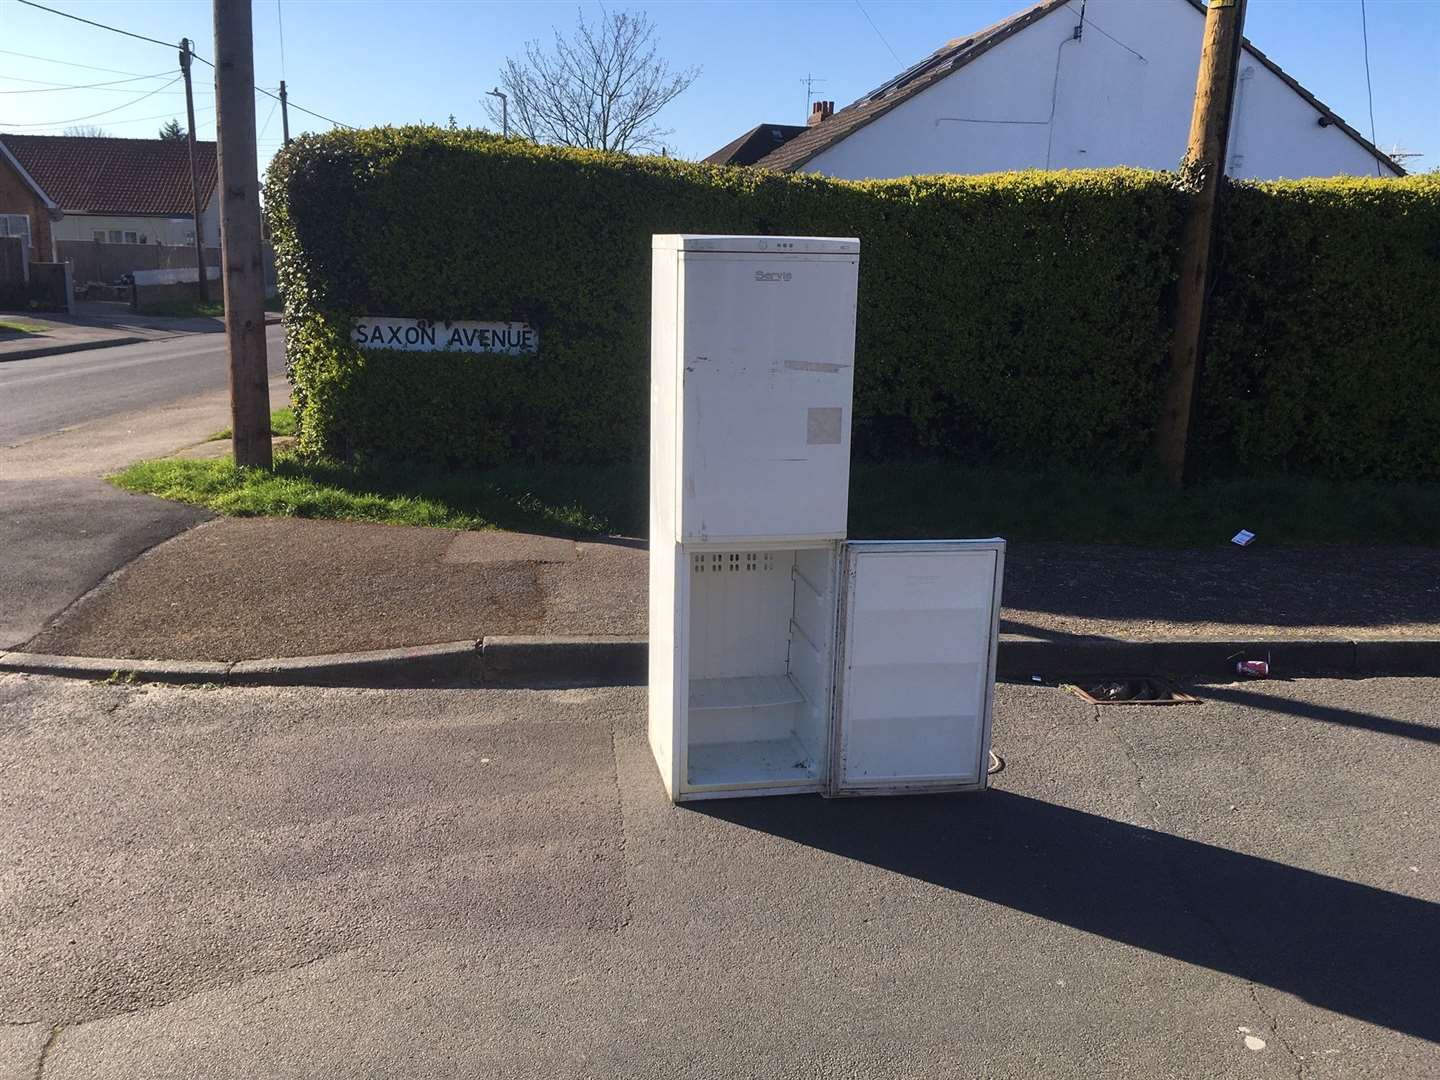 Fridge-freezer dumped over night in the middle of a road on the Isle of Sheppey